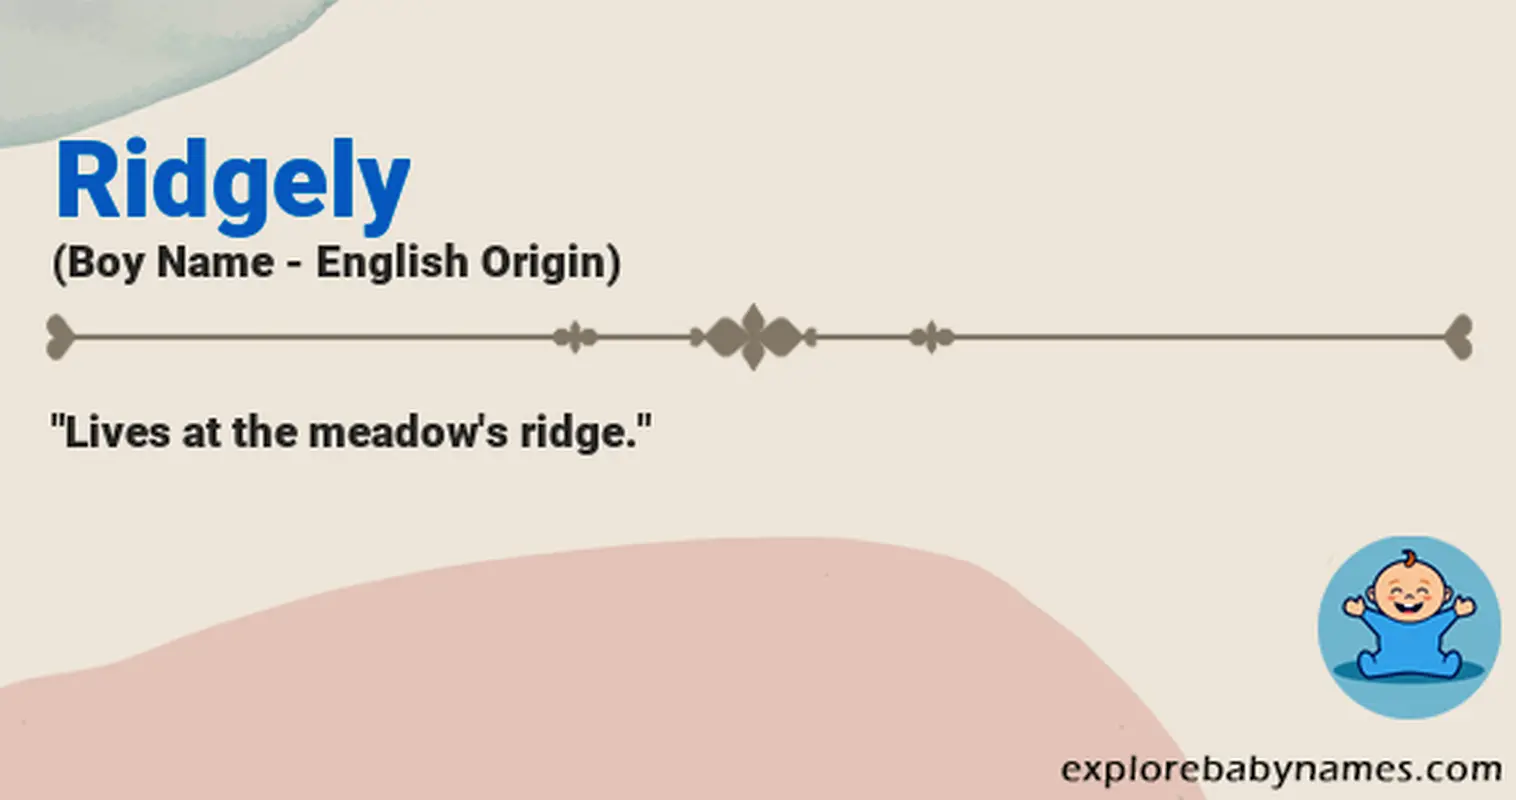 Meaning of Ridgely